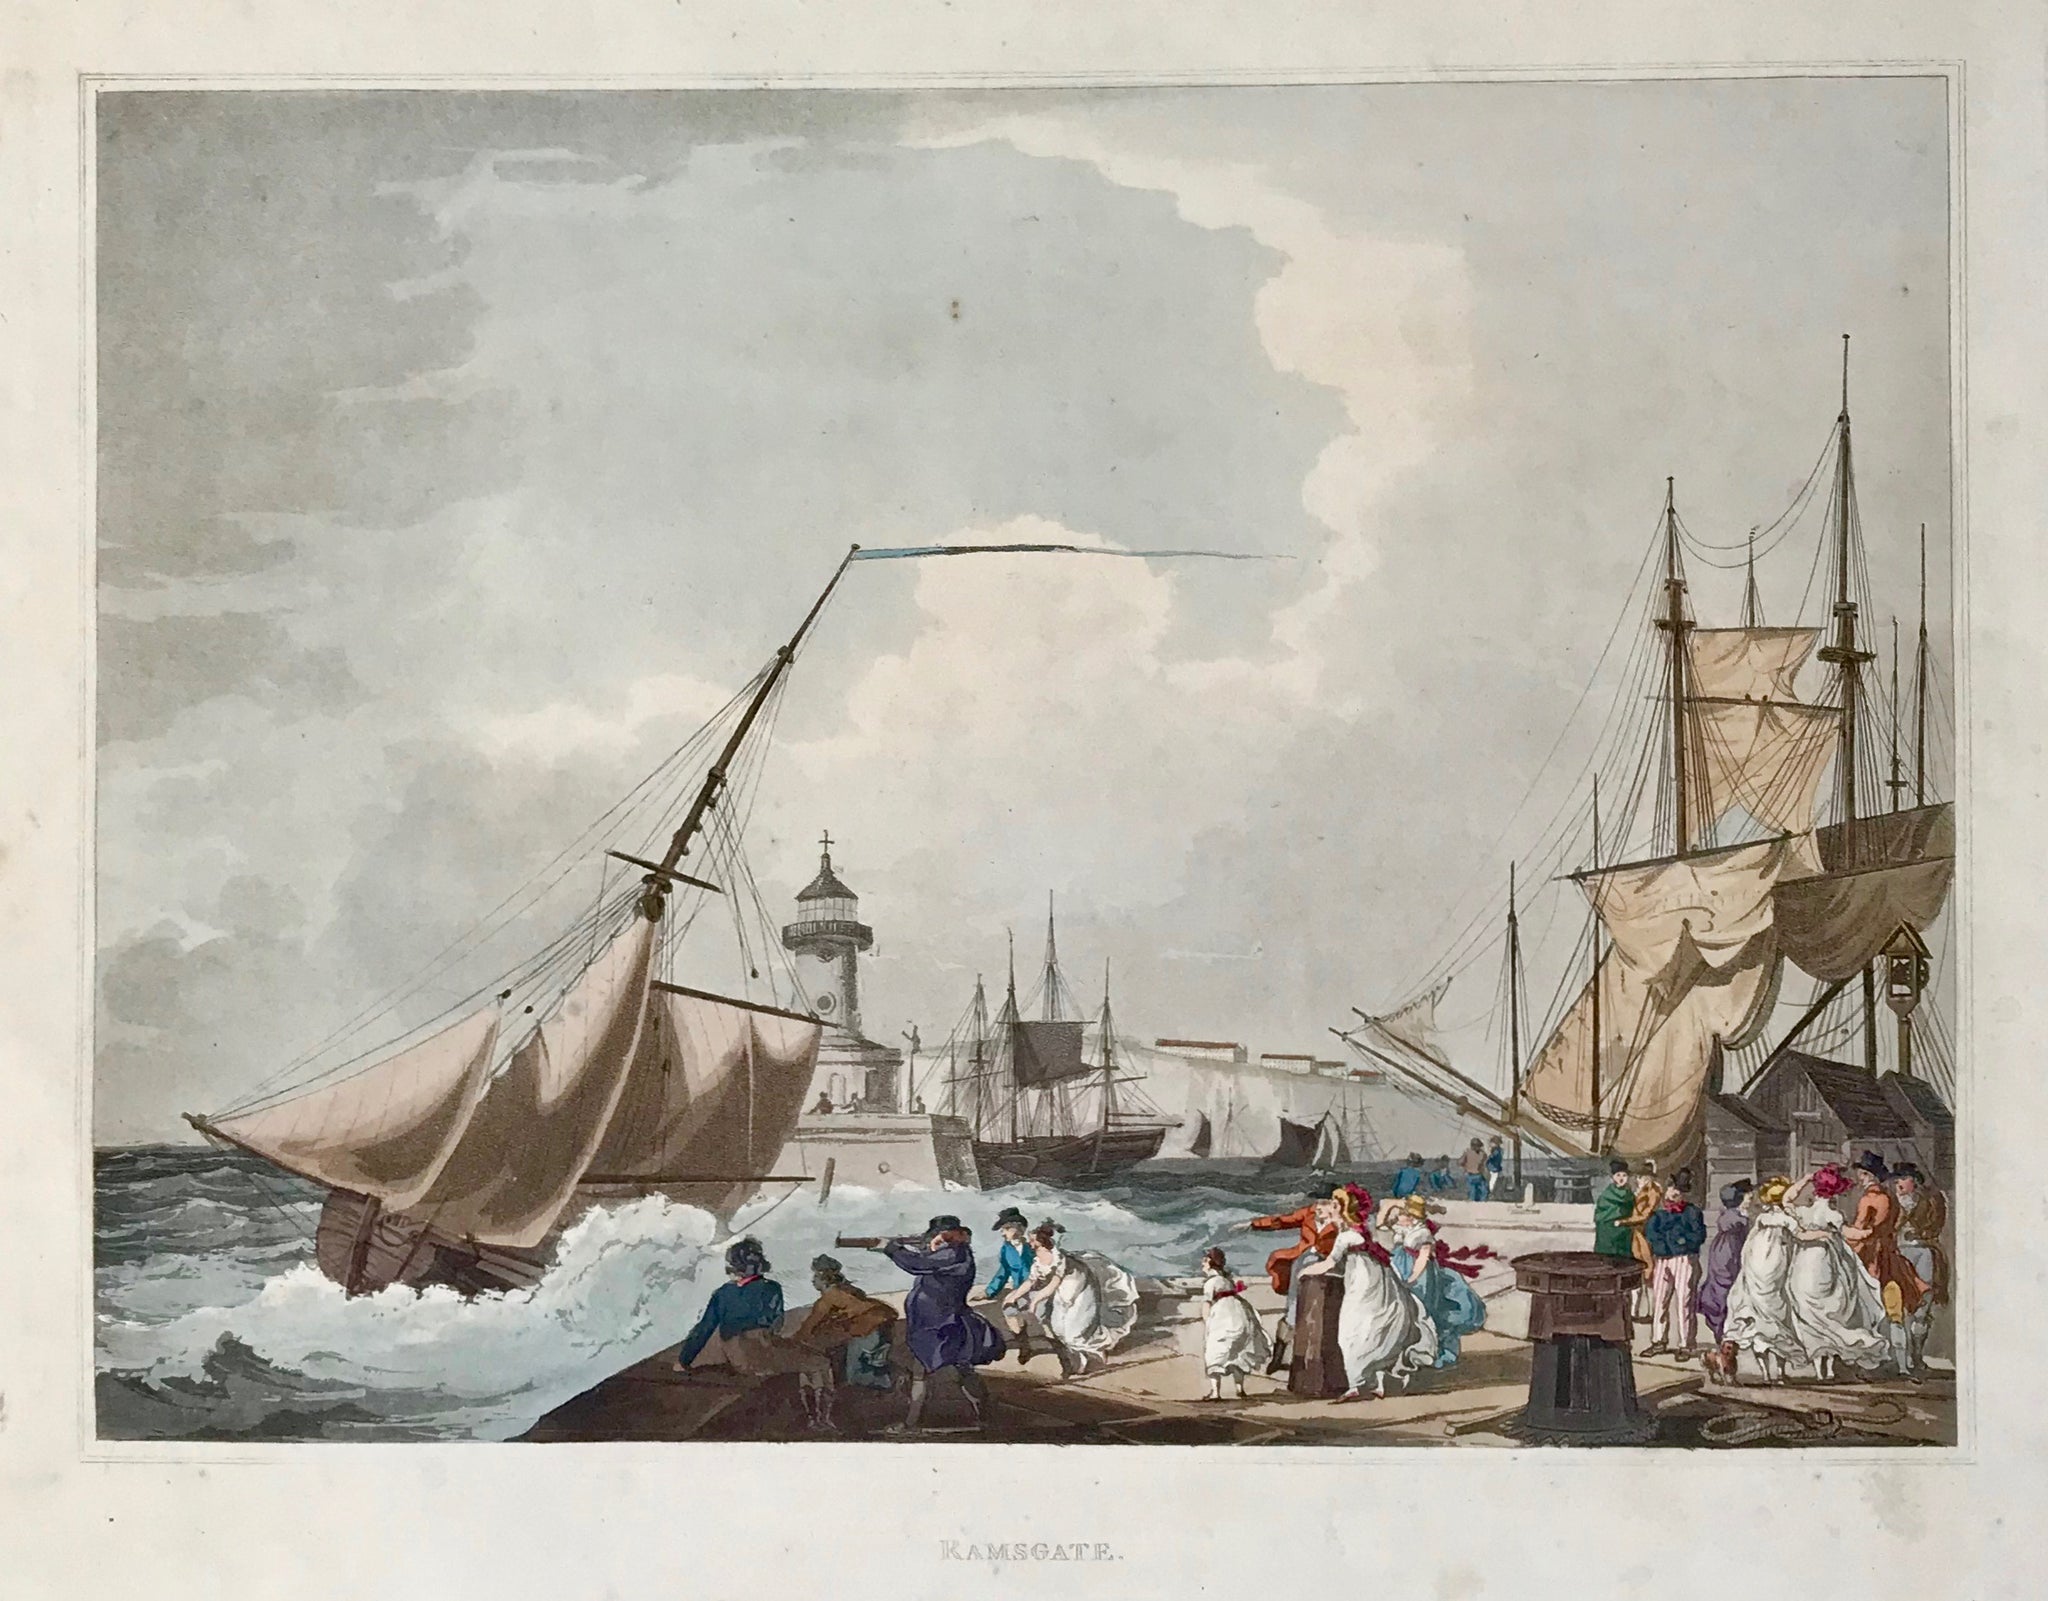 "Ramsgate"  Fine aquatint by William Pickett after the artist Philippe Jacques de Loutherbourg.  Published ca 1824. Exquiste, original hand coloring.  From the book " The Romantic and Picturesque Scenery of England and Wales".